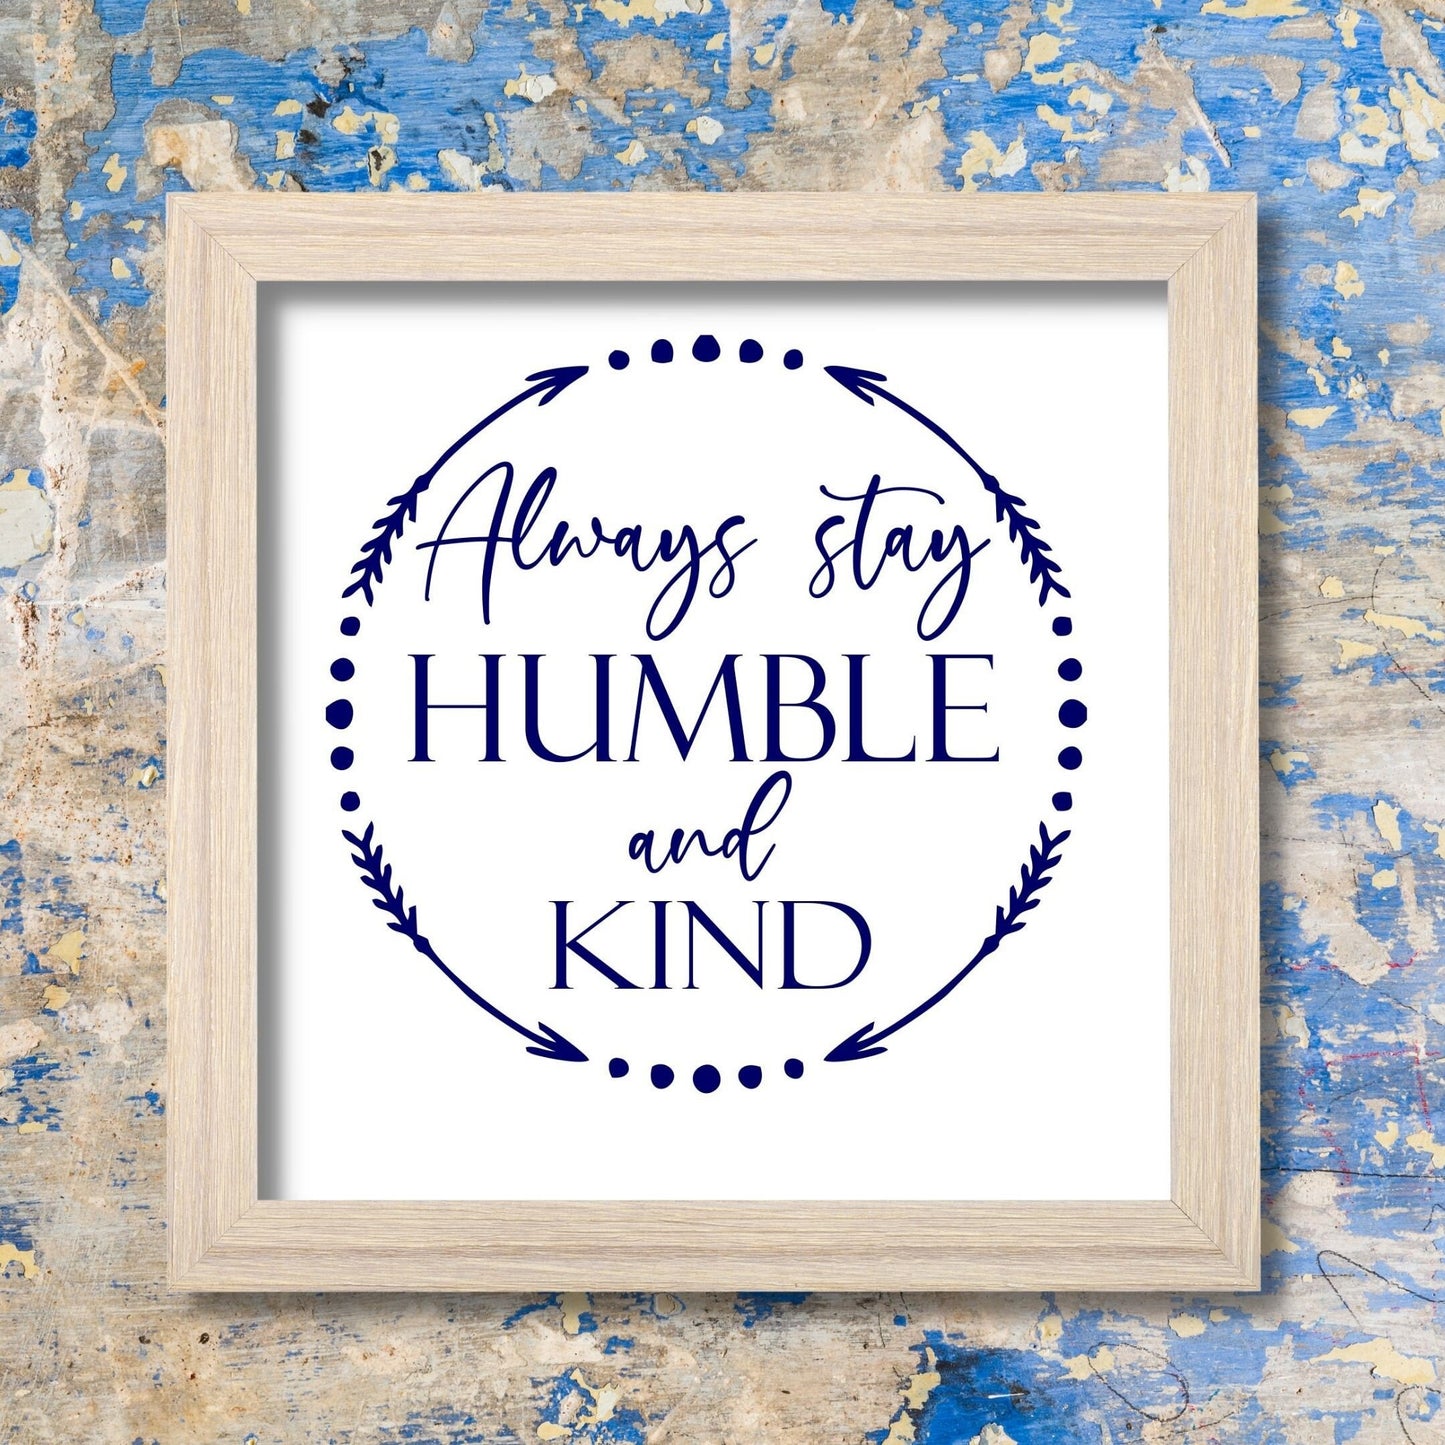 Printable wall quote, frameable quote, always stay humble and kind, inspirations sayings, wall art